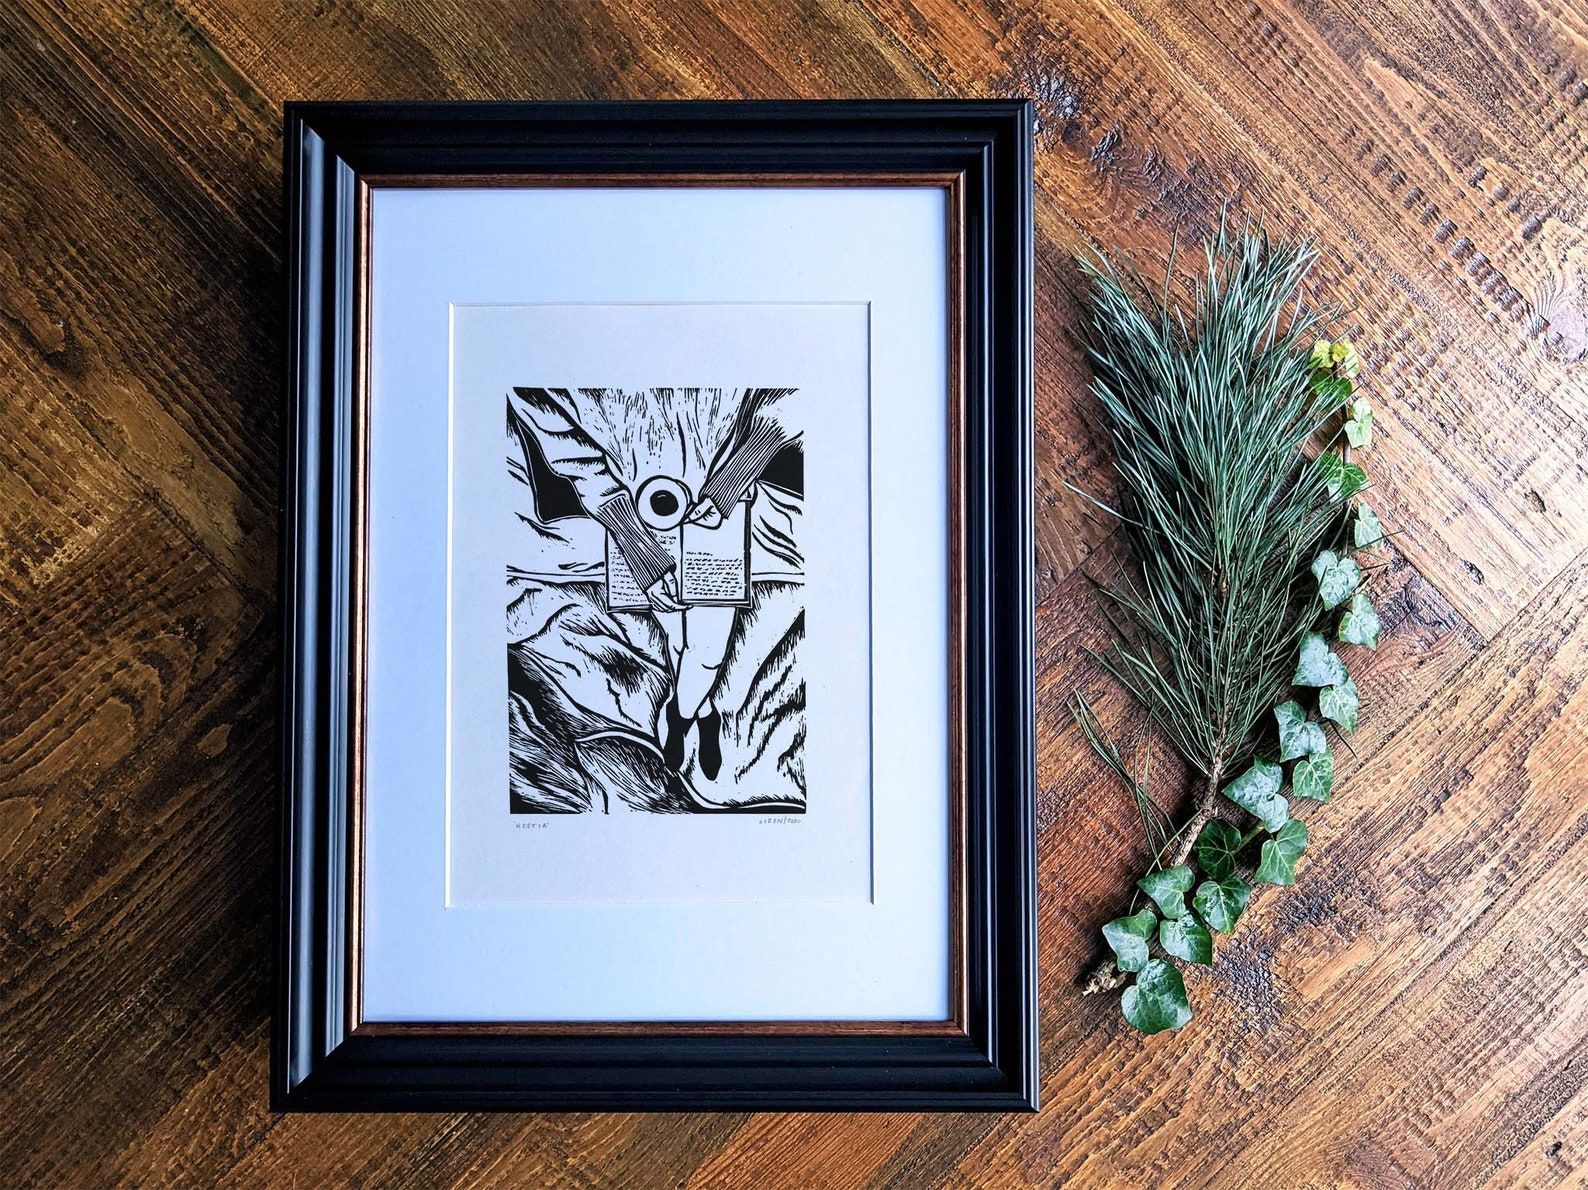 Image of a linocut print that features a person reading with a cup of tea. It's in a black frame on a wooden background. 